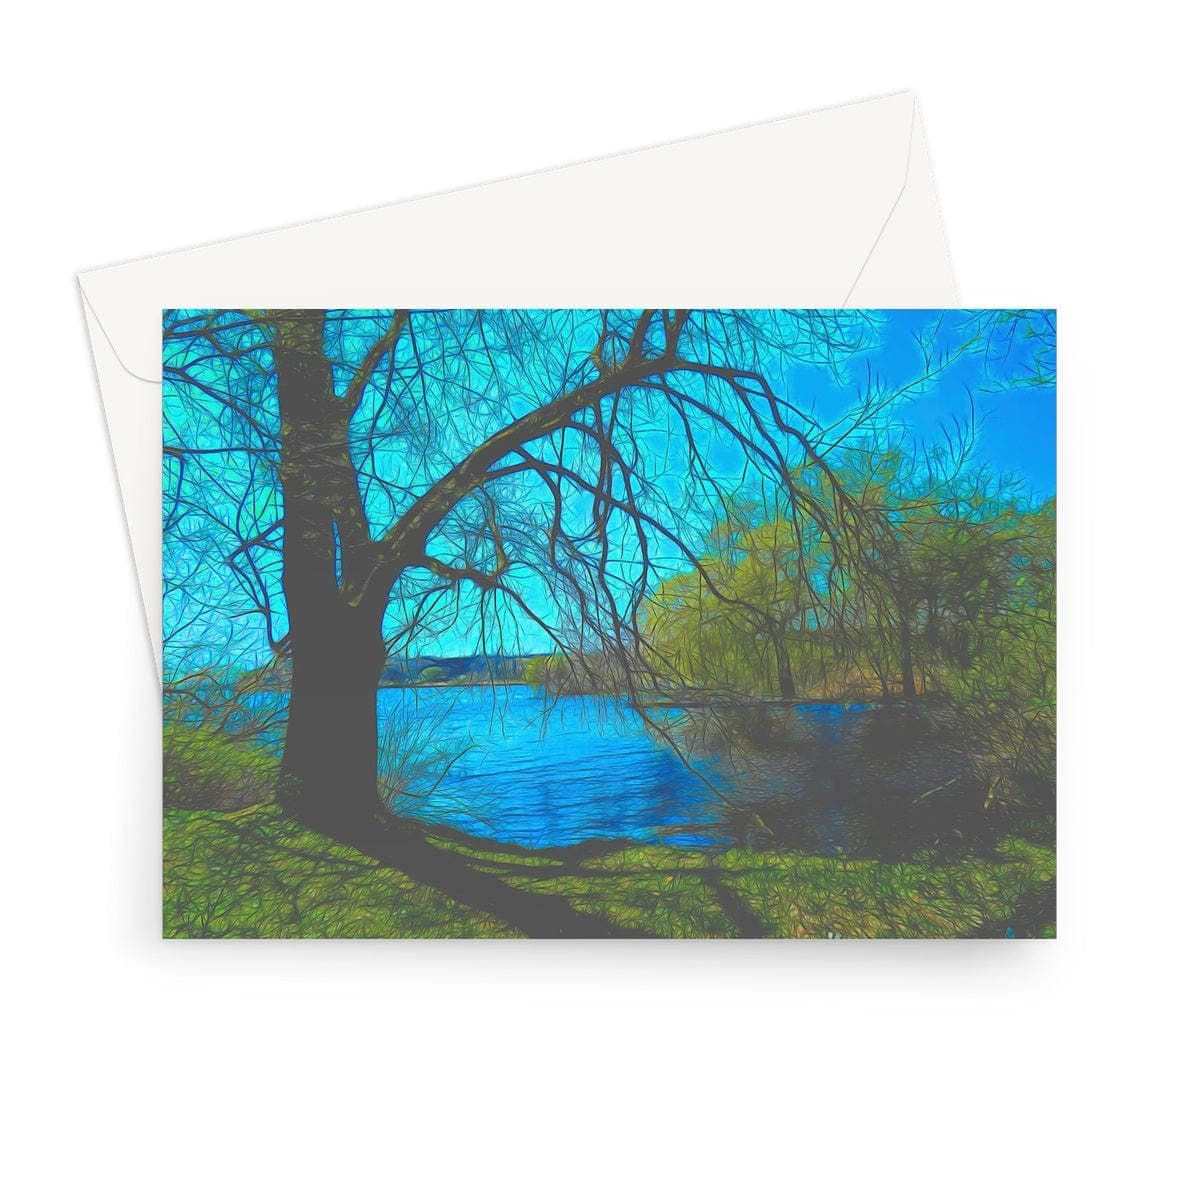 Resting at the lake,  Art on a Greeting Card,  by Sensus Studio